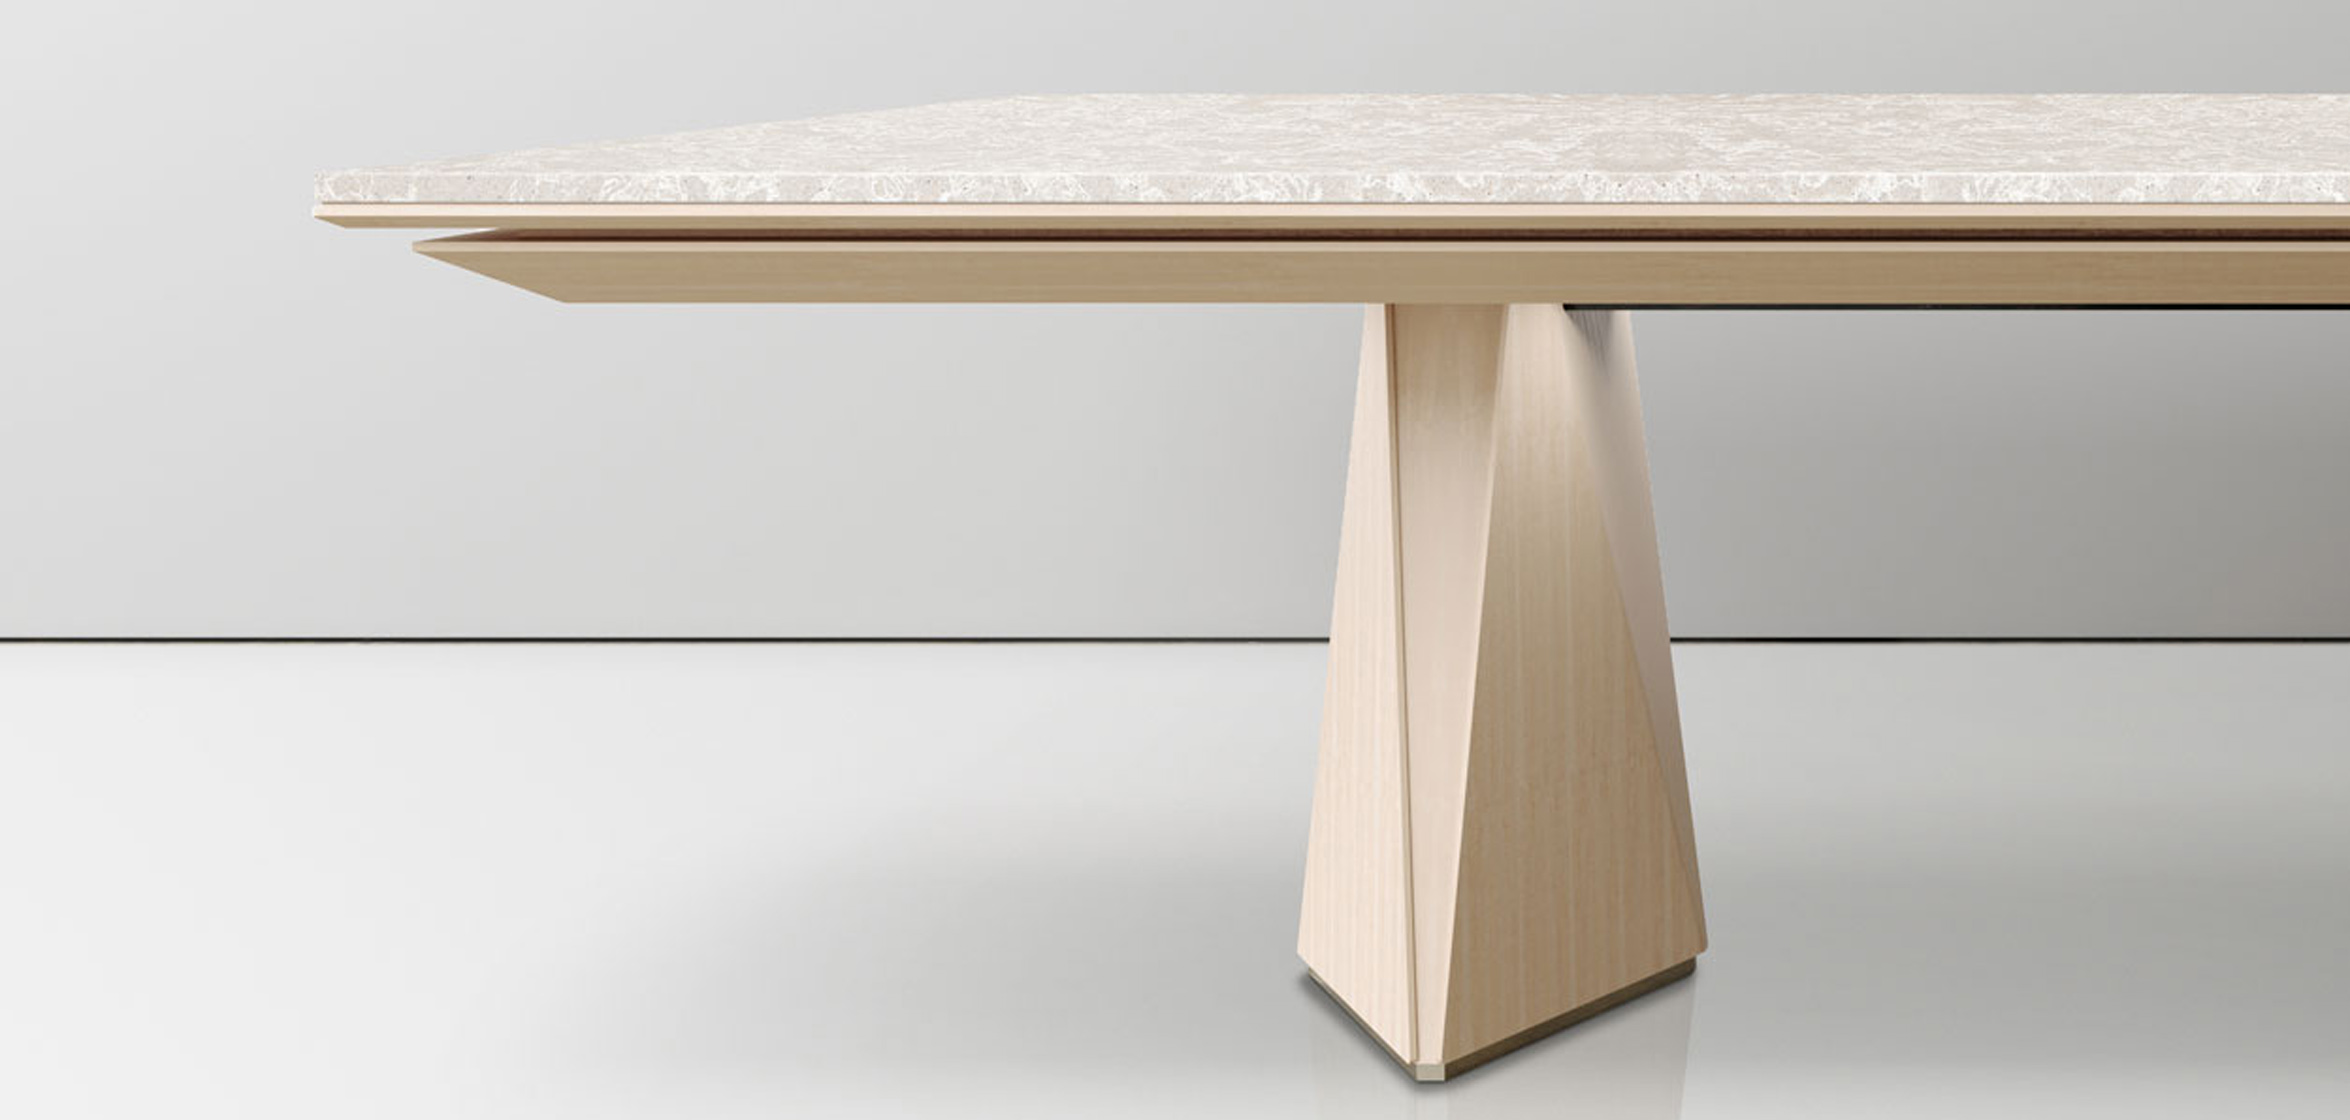 Introducing Skyward Conference Table Designed by Alyssa Coletti for